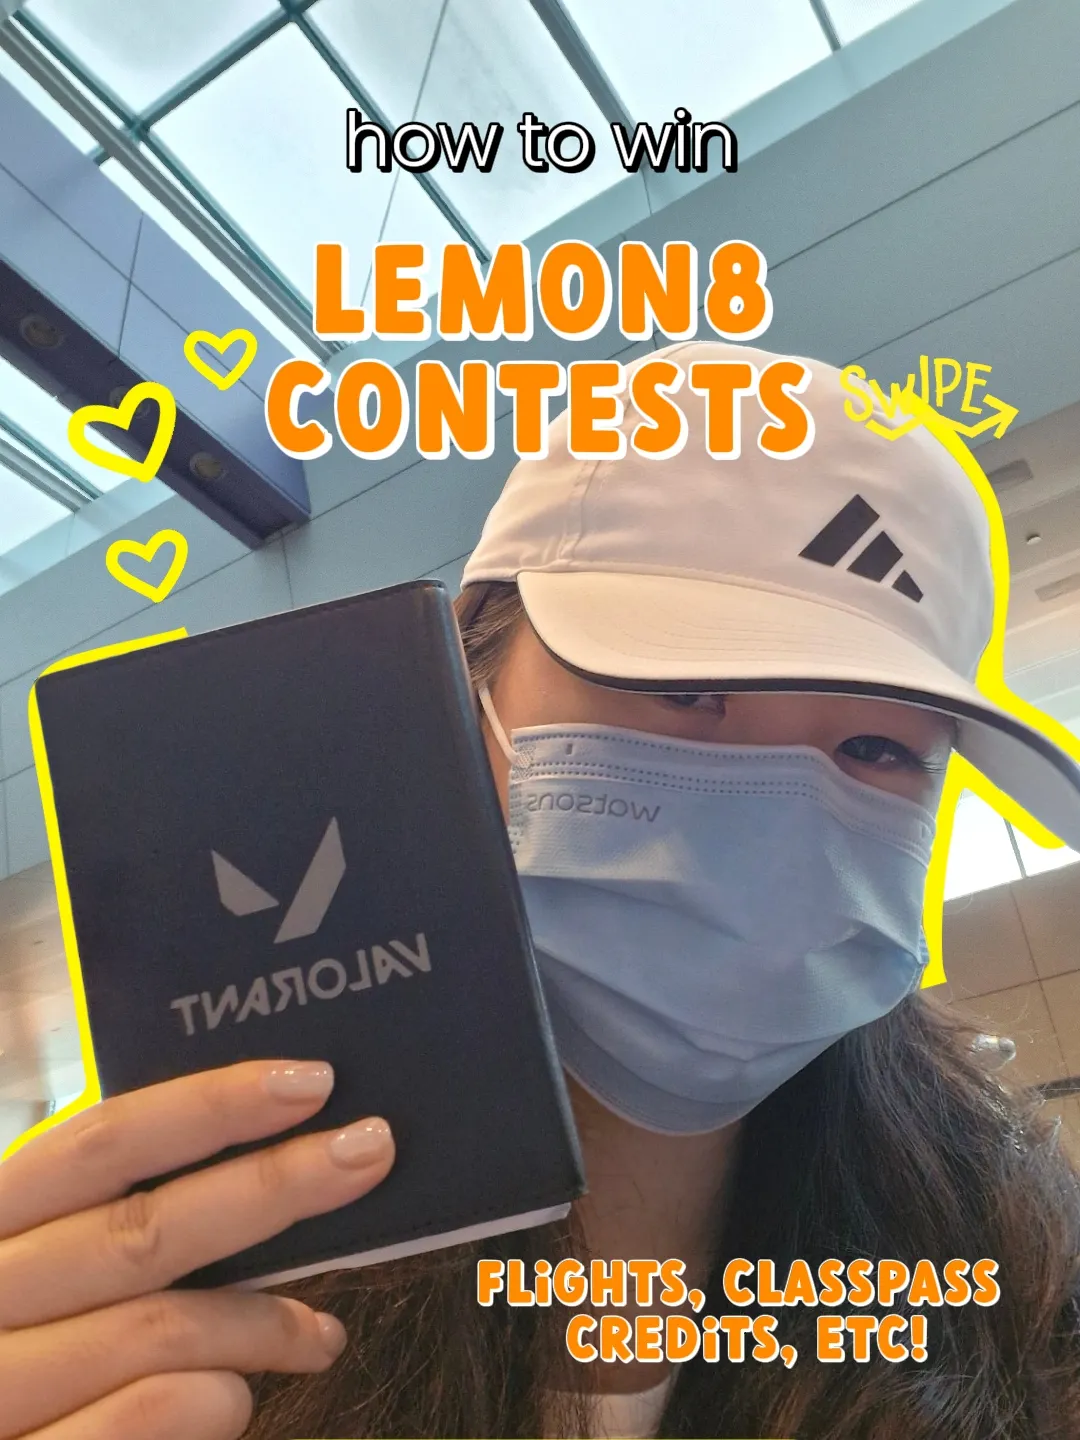 i won Lemon8 contests and so can YOU ✨'s images